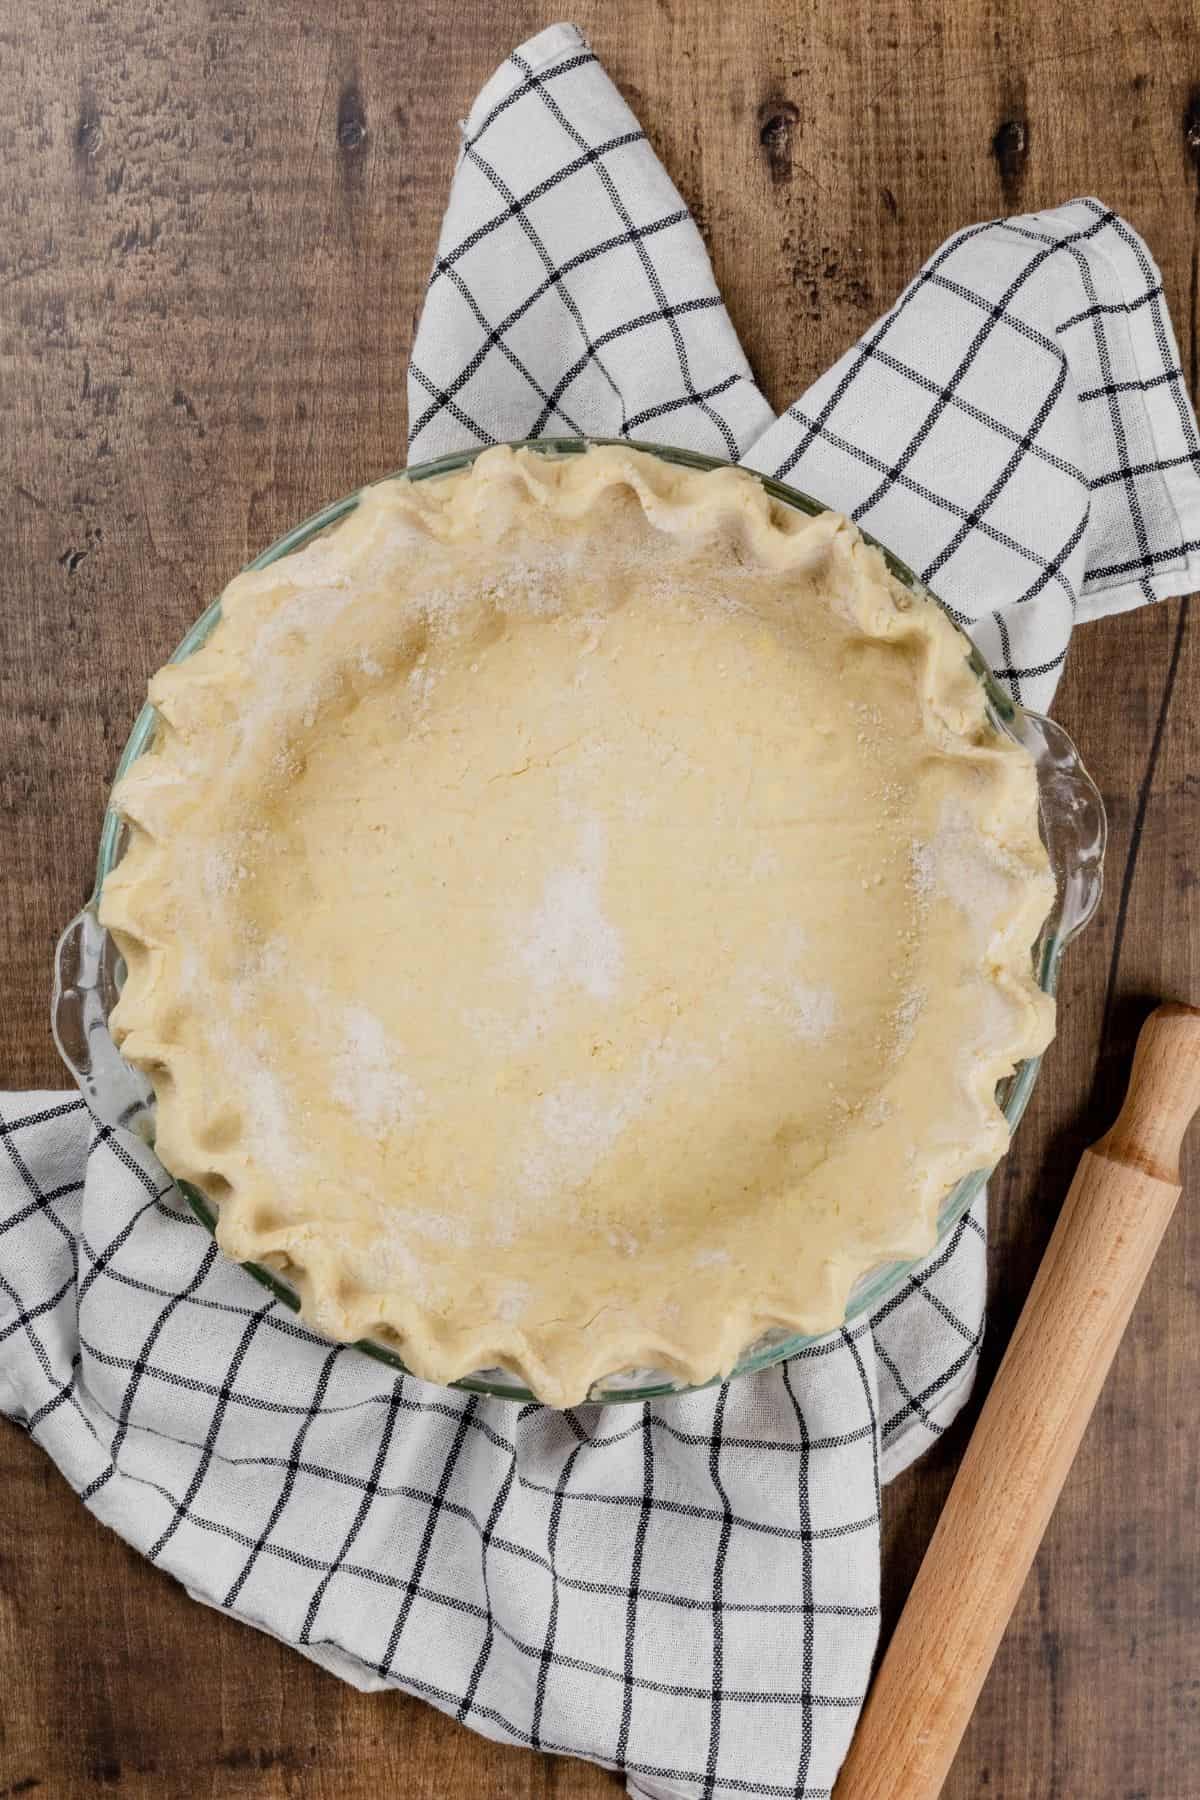 unbaked and crimped gluten free pie crust in a glass pie pan. it is resting on a blue and white towel next to a rolling pin on a wood tabletop.